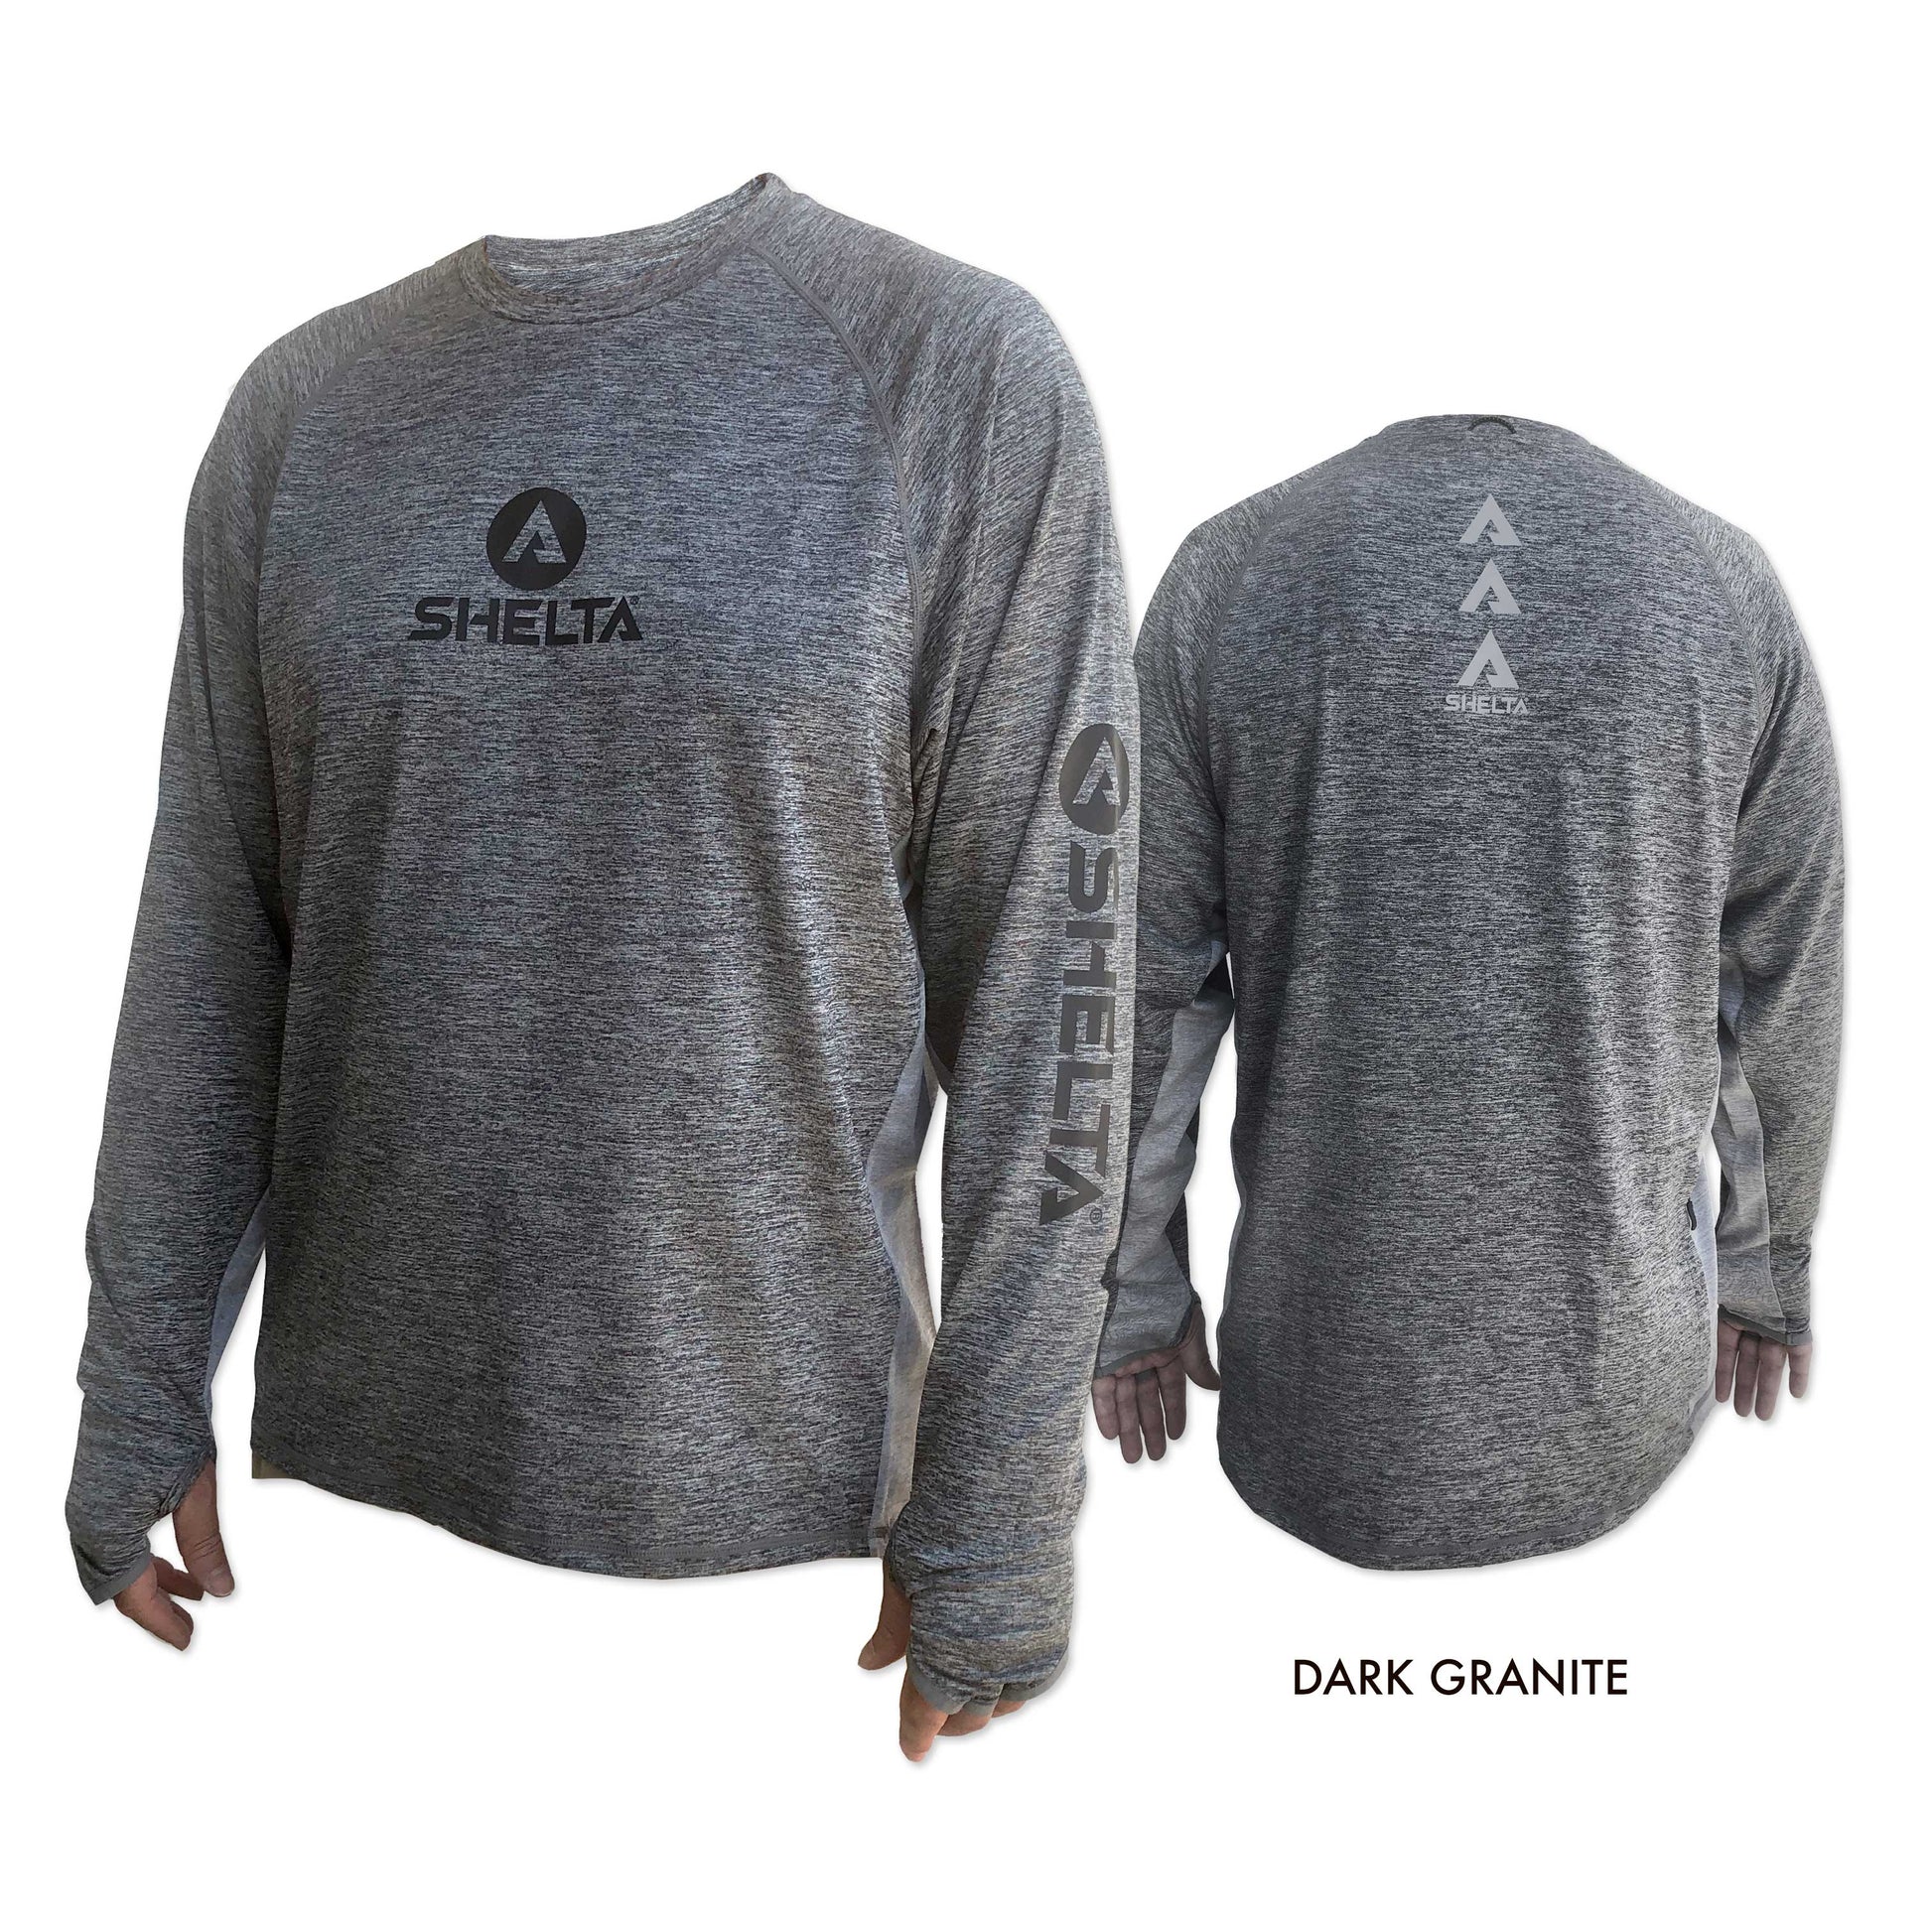 The Aquaterra Crew neck in Dark Granite is engineered & built with sun protection, function, and durability in mind.  Truly amphibious these technical tops work as well in the water as on land.  Offering features consistent with Shelta core values and innovation goals.   UPF 50+ UV protection, the highest rating given.  Blocks 98% of UVA/UVB radiation.